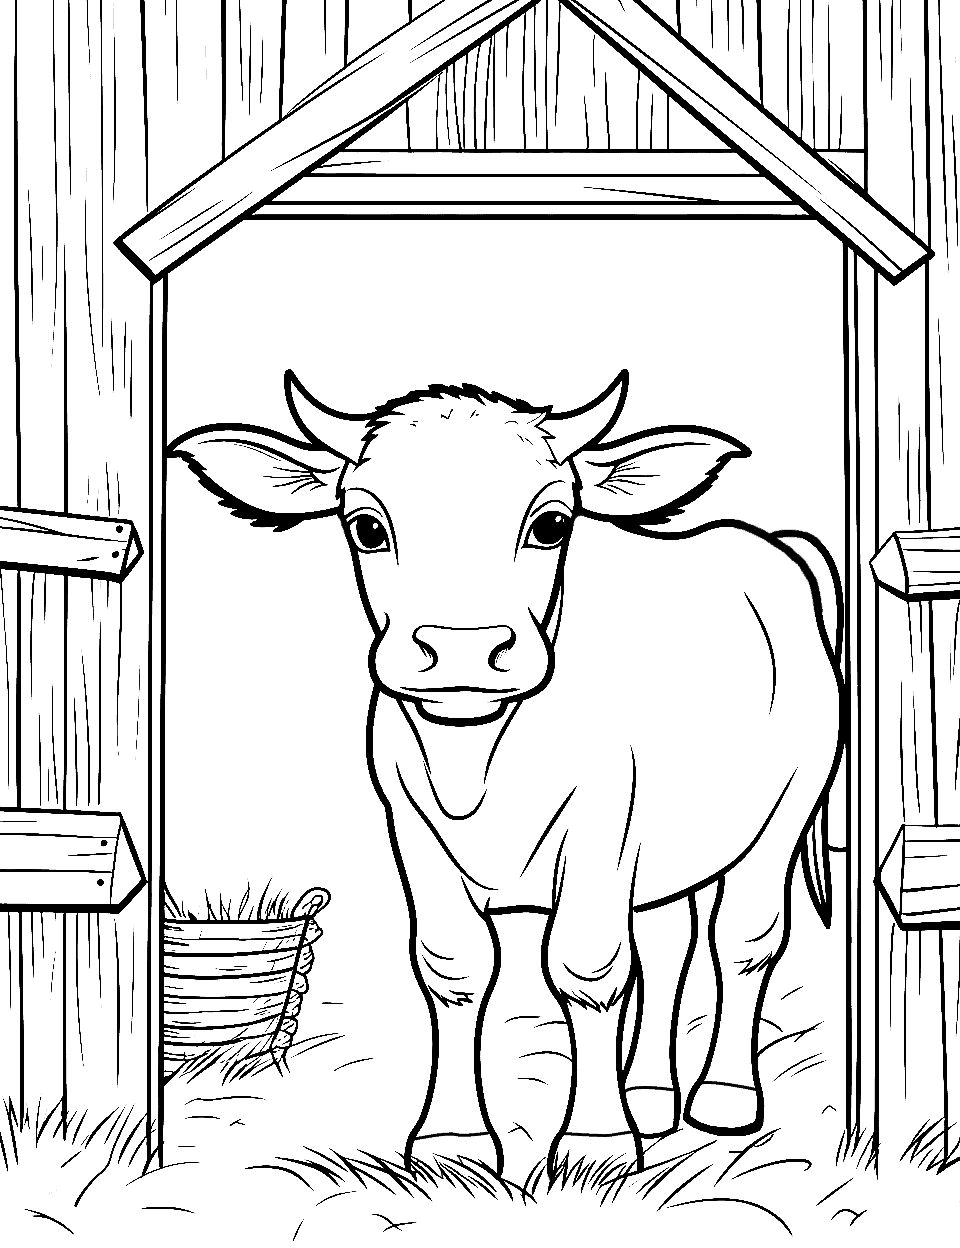 Cozy in the Barn Coloring Page - A cow comfortably situated inside a basic, open barn structure.